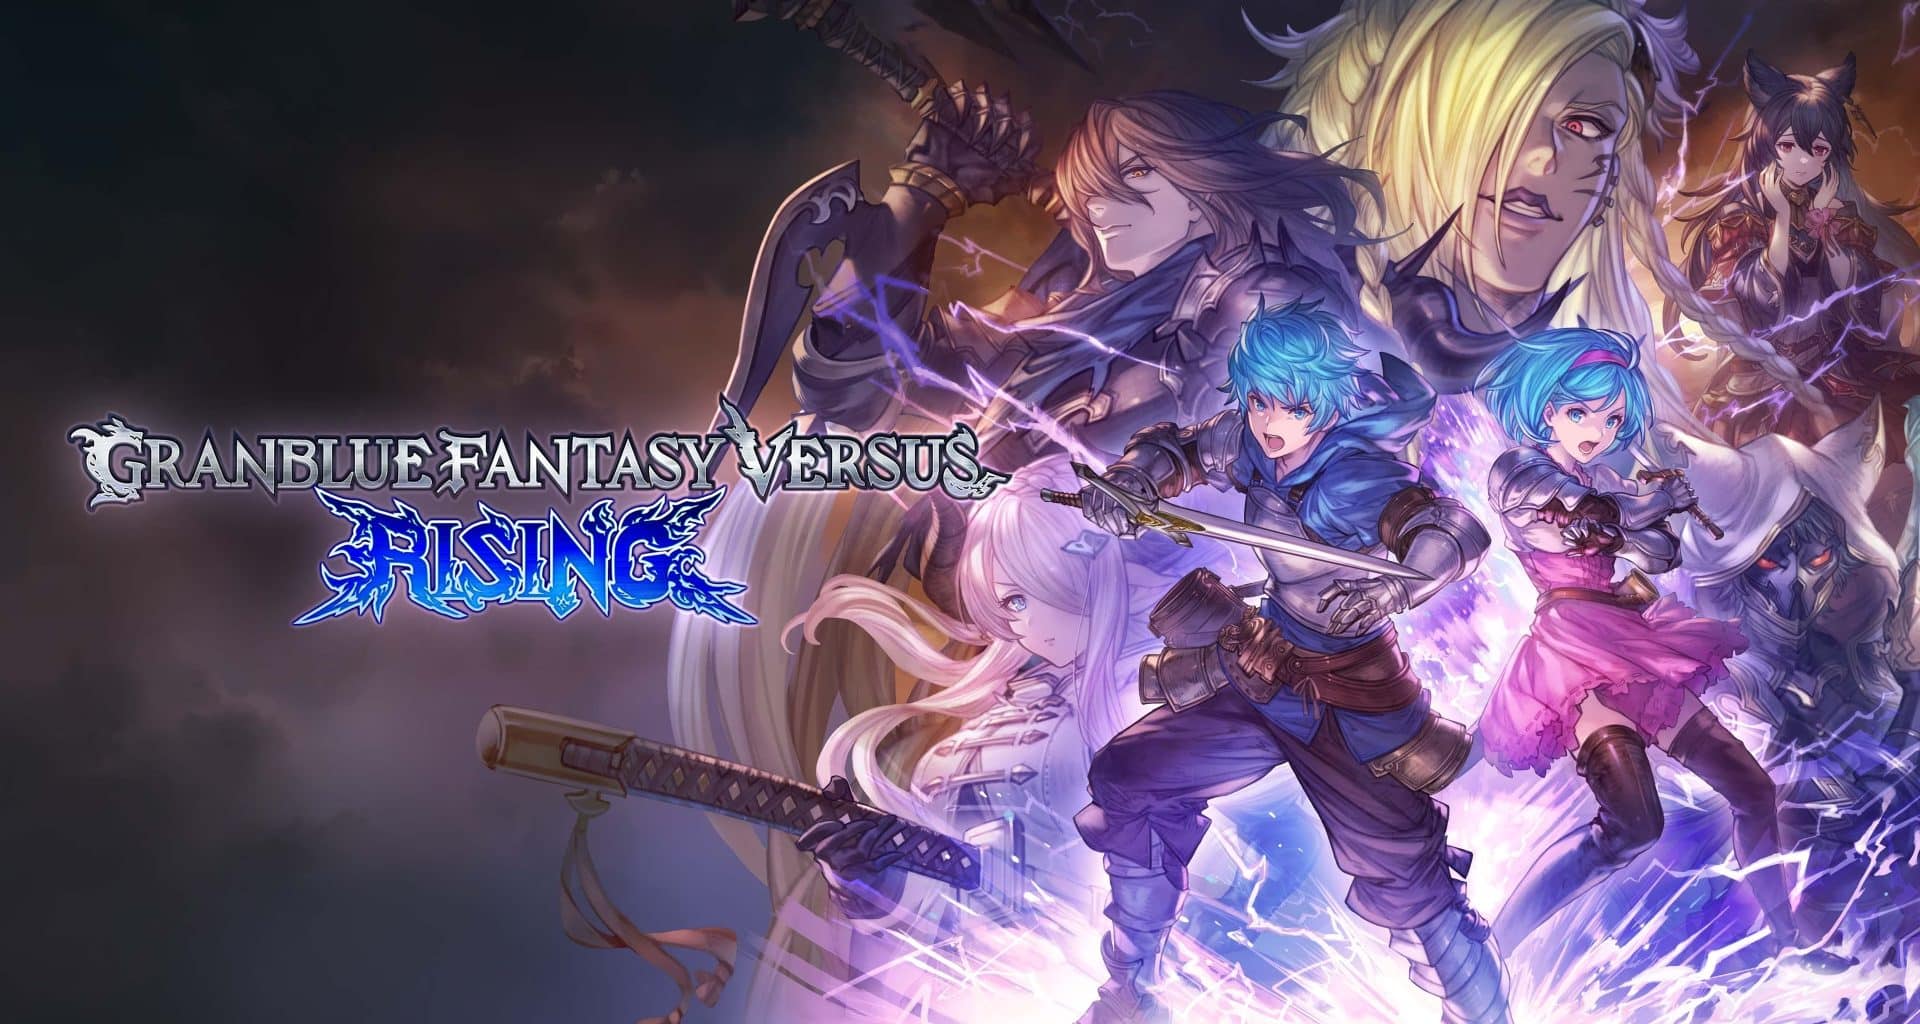 Granblue Fantasy Versus: Rising Review - Back for Round Two 34534